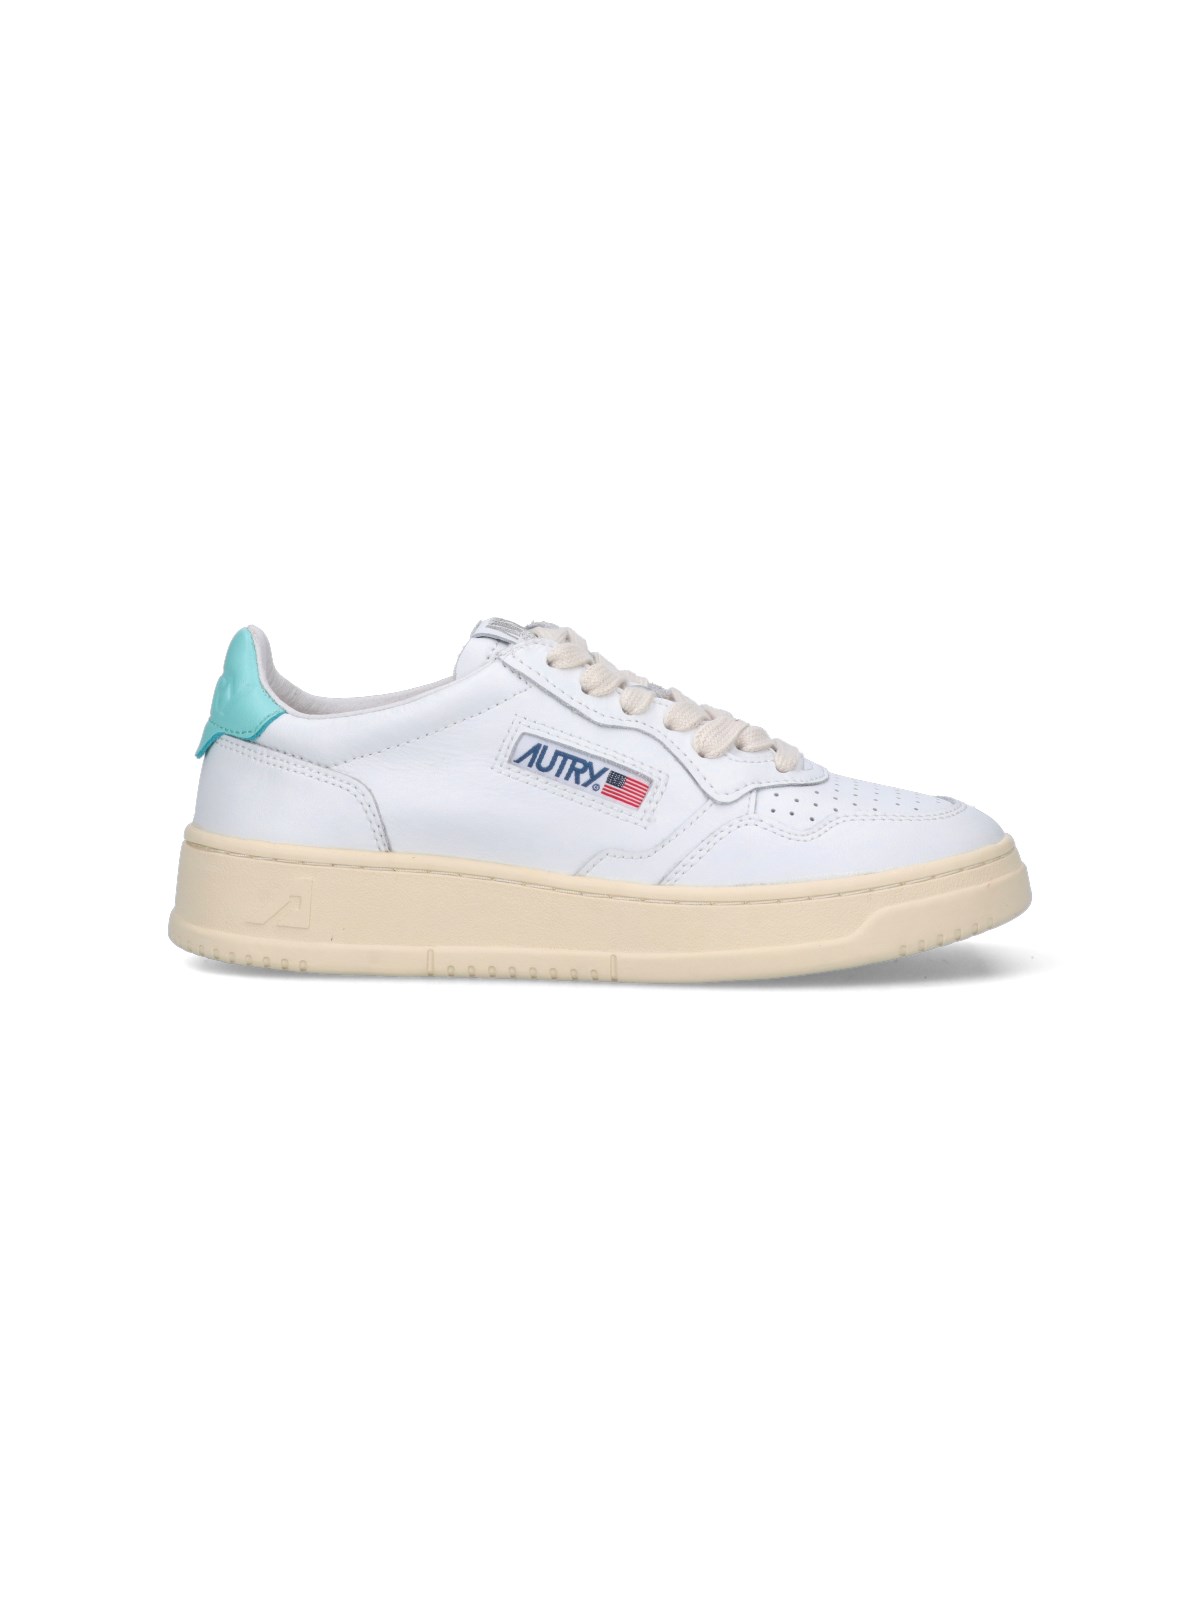 Autry "medalist Low" Sneakers In White